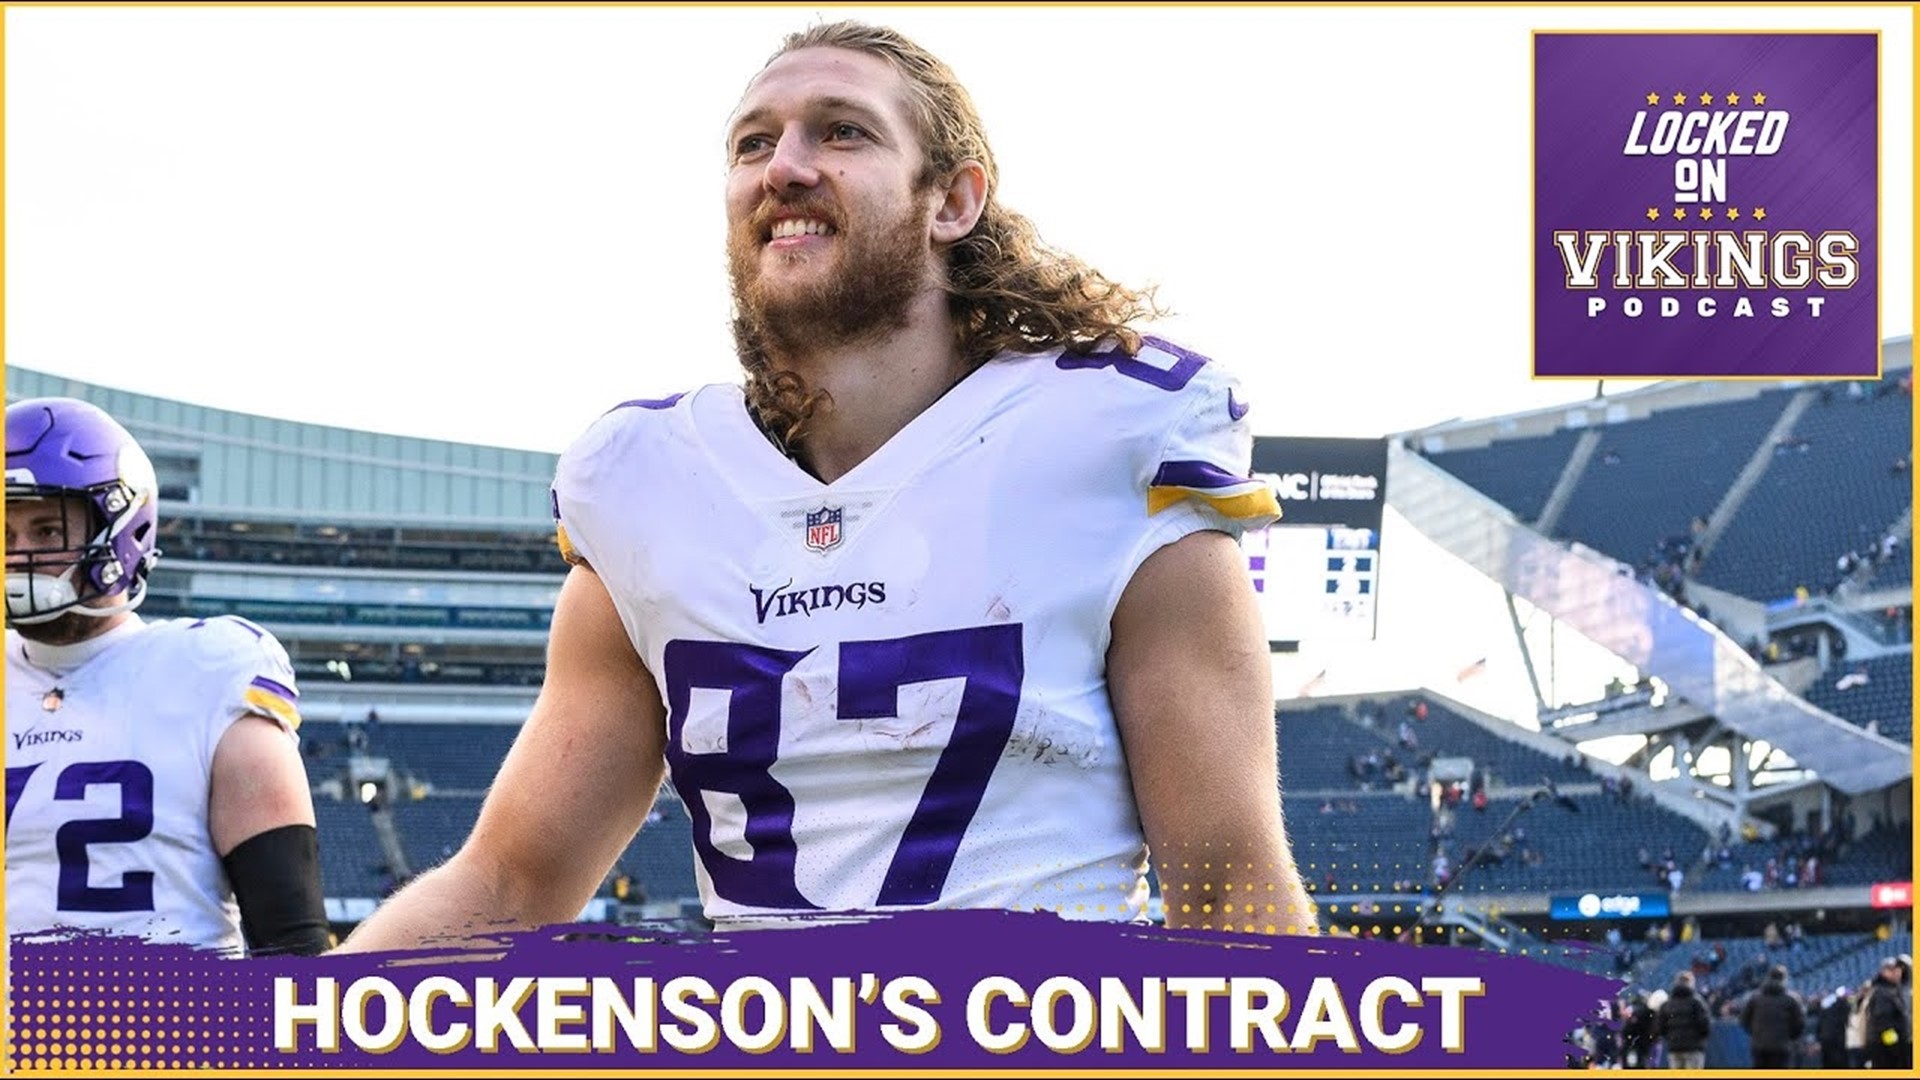 T.J. Hockenson said all the right things at OTAs when asked about his contract situation. We know negotiations are underway, but we do not know what it'll result in